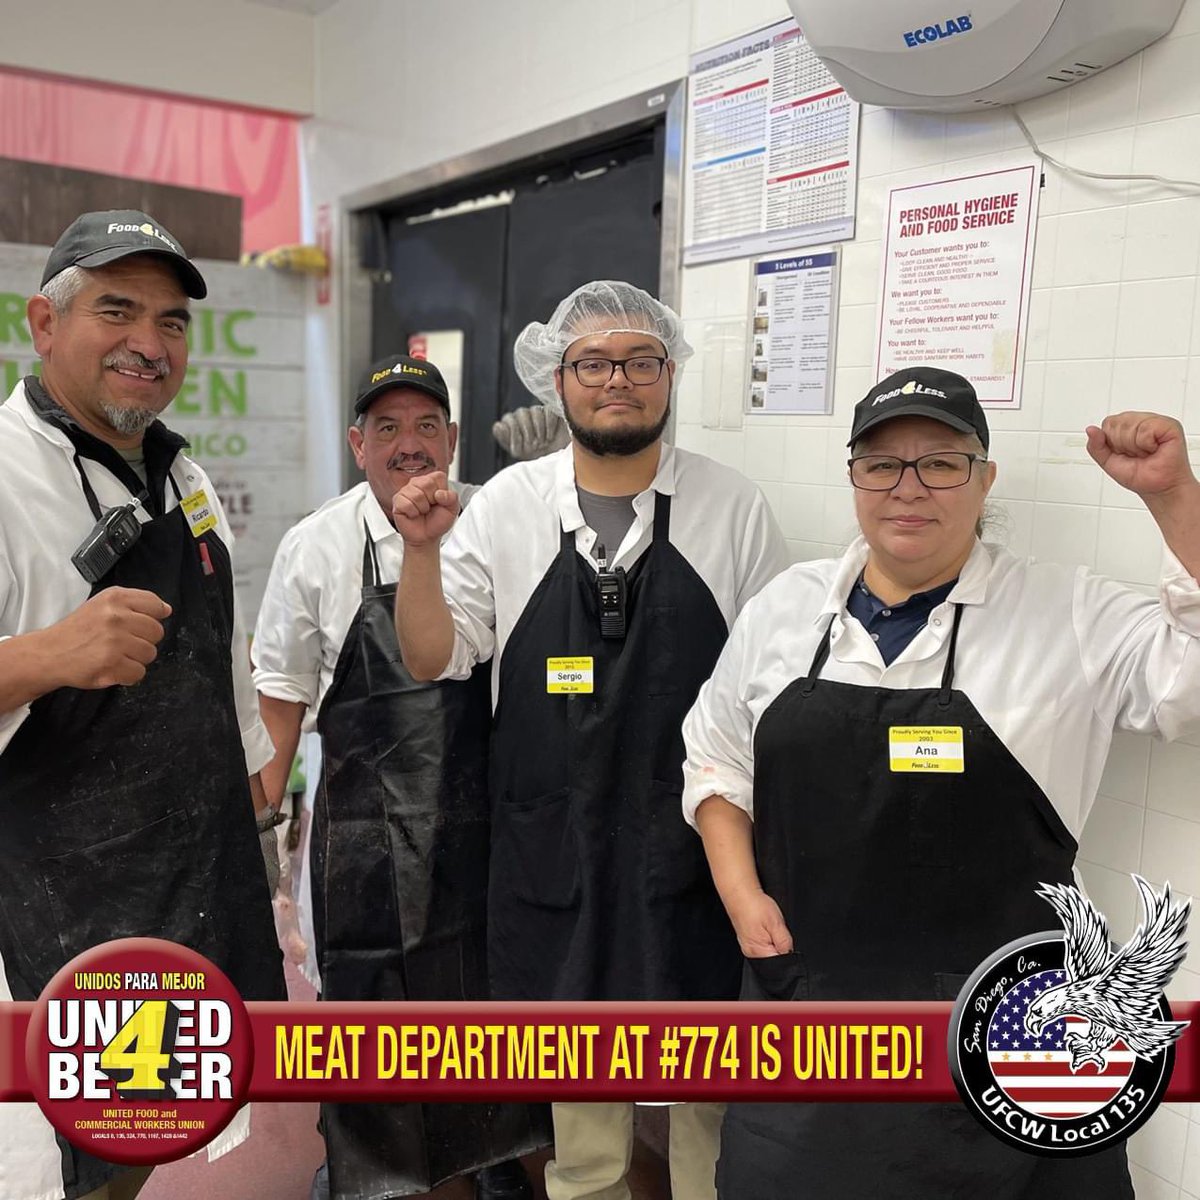 With Food4Less negotiations resuming next week, #UFCW members in the Meat Department at store #774 in El Centro are #united4better wages, benefits, staffing & store security. Together, they are fighting for a better work life.